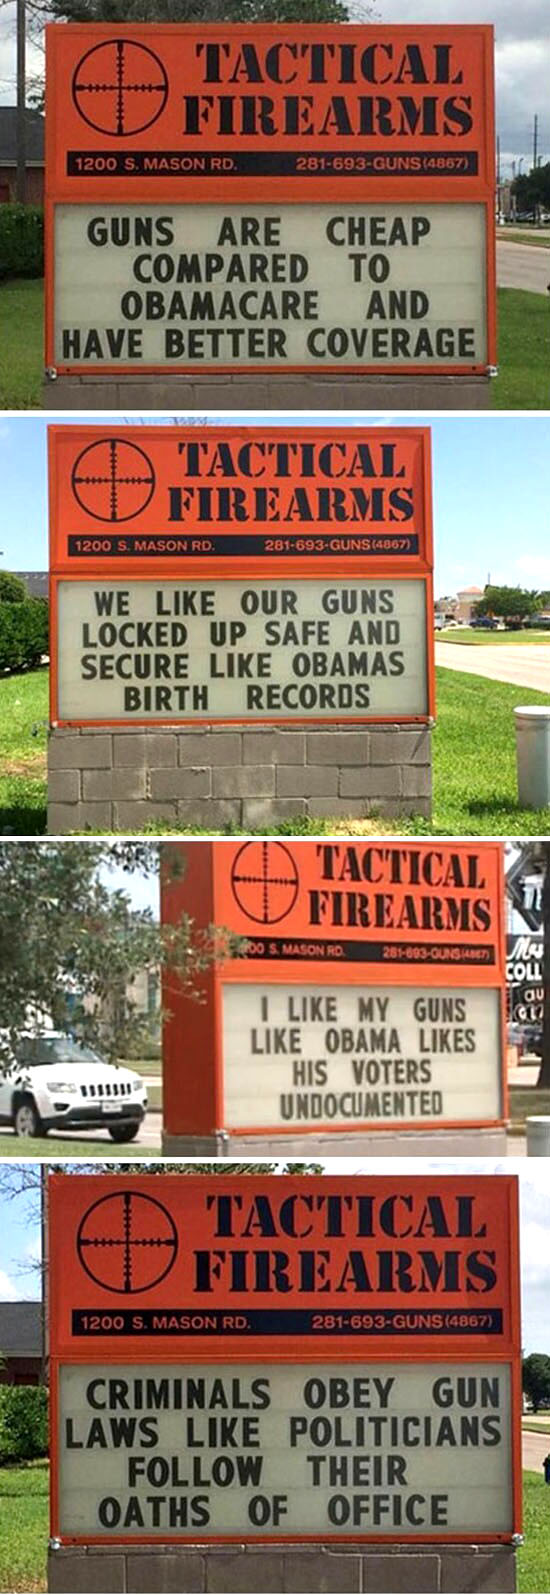 Tactical Firearms sign boards with sarcastic advertisements